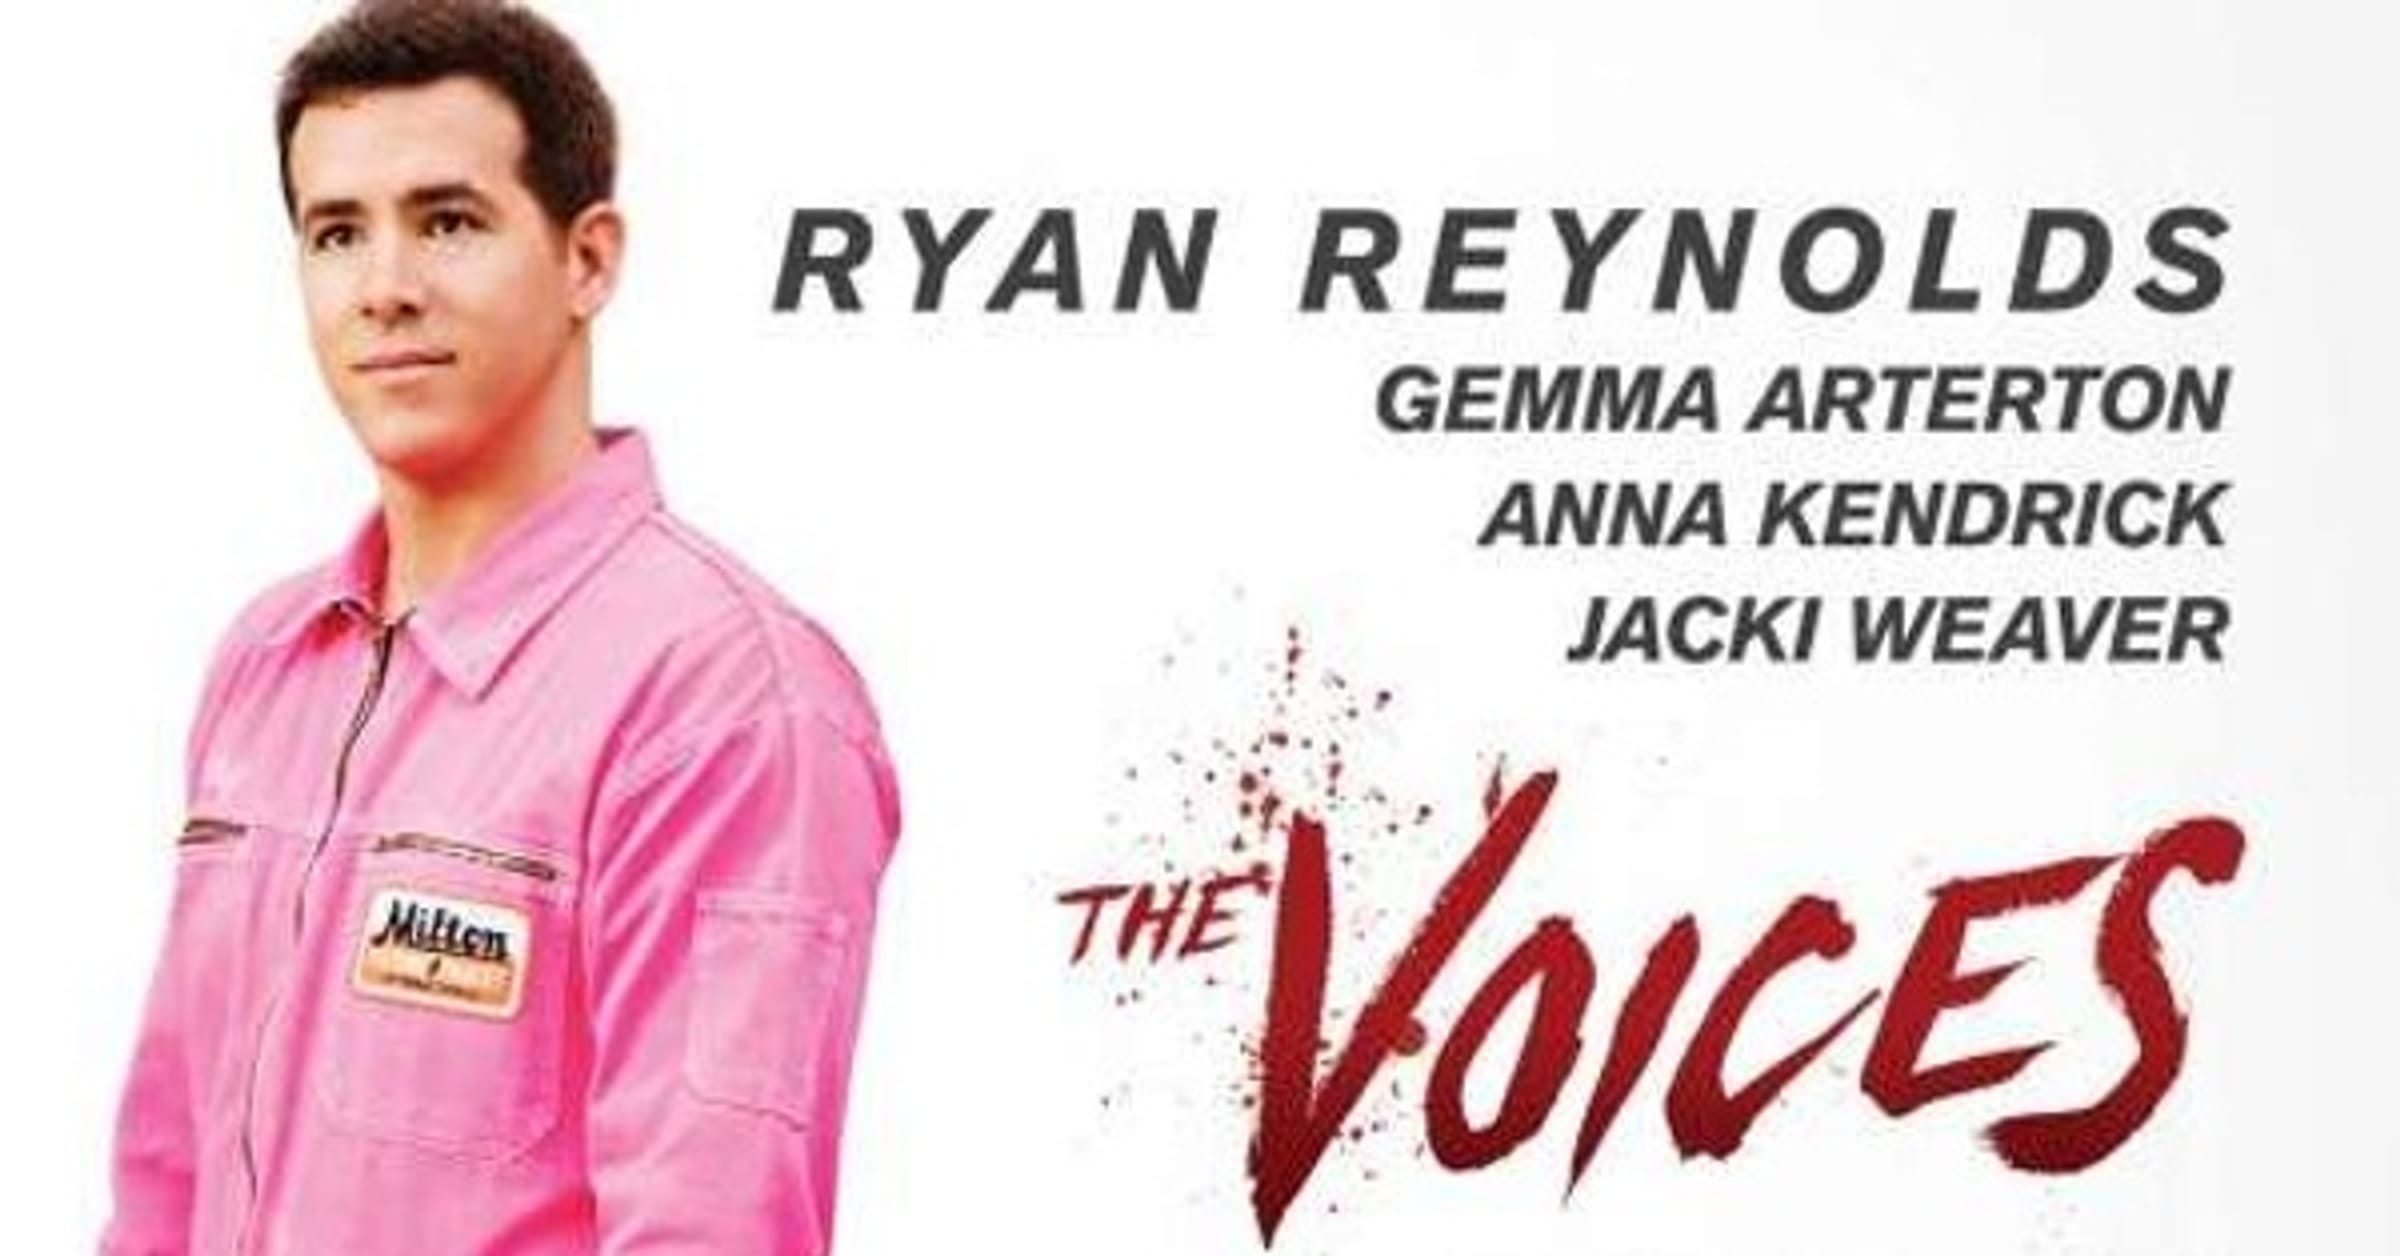 Ryan Reynolds as a Killer in 'The Voices' - The New York Times